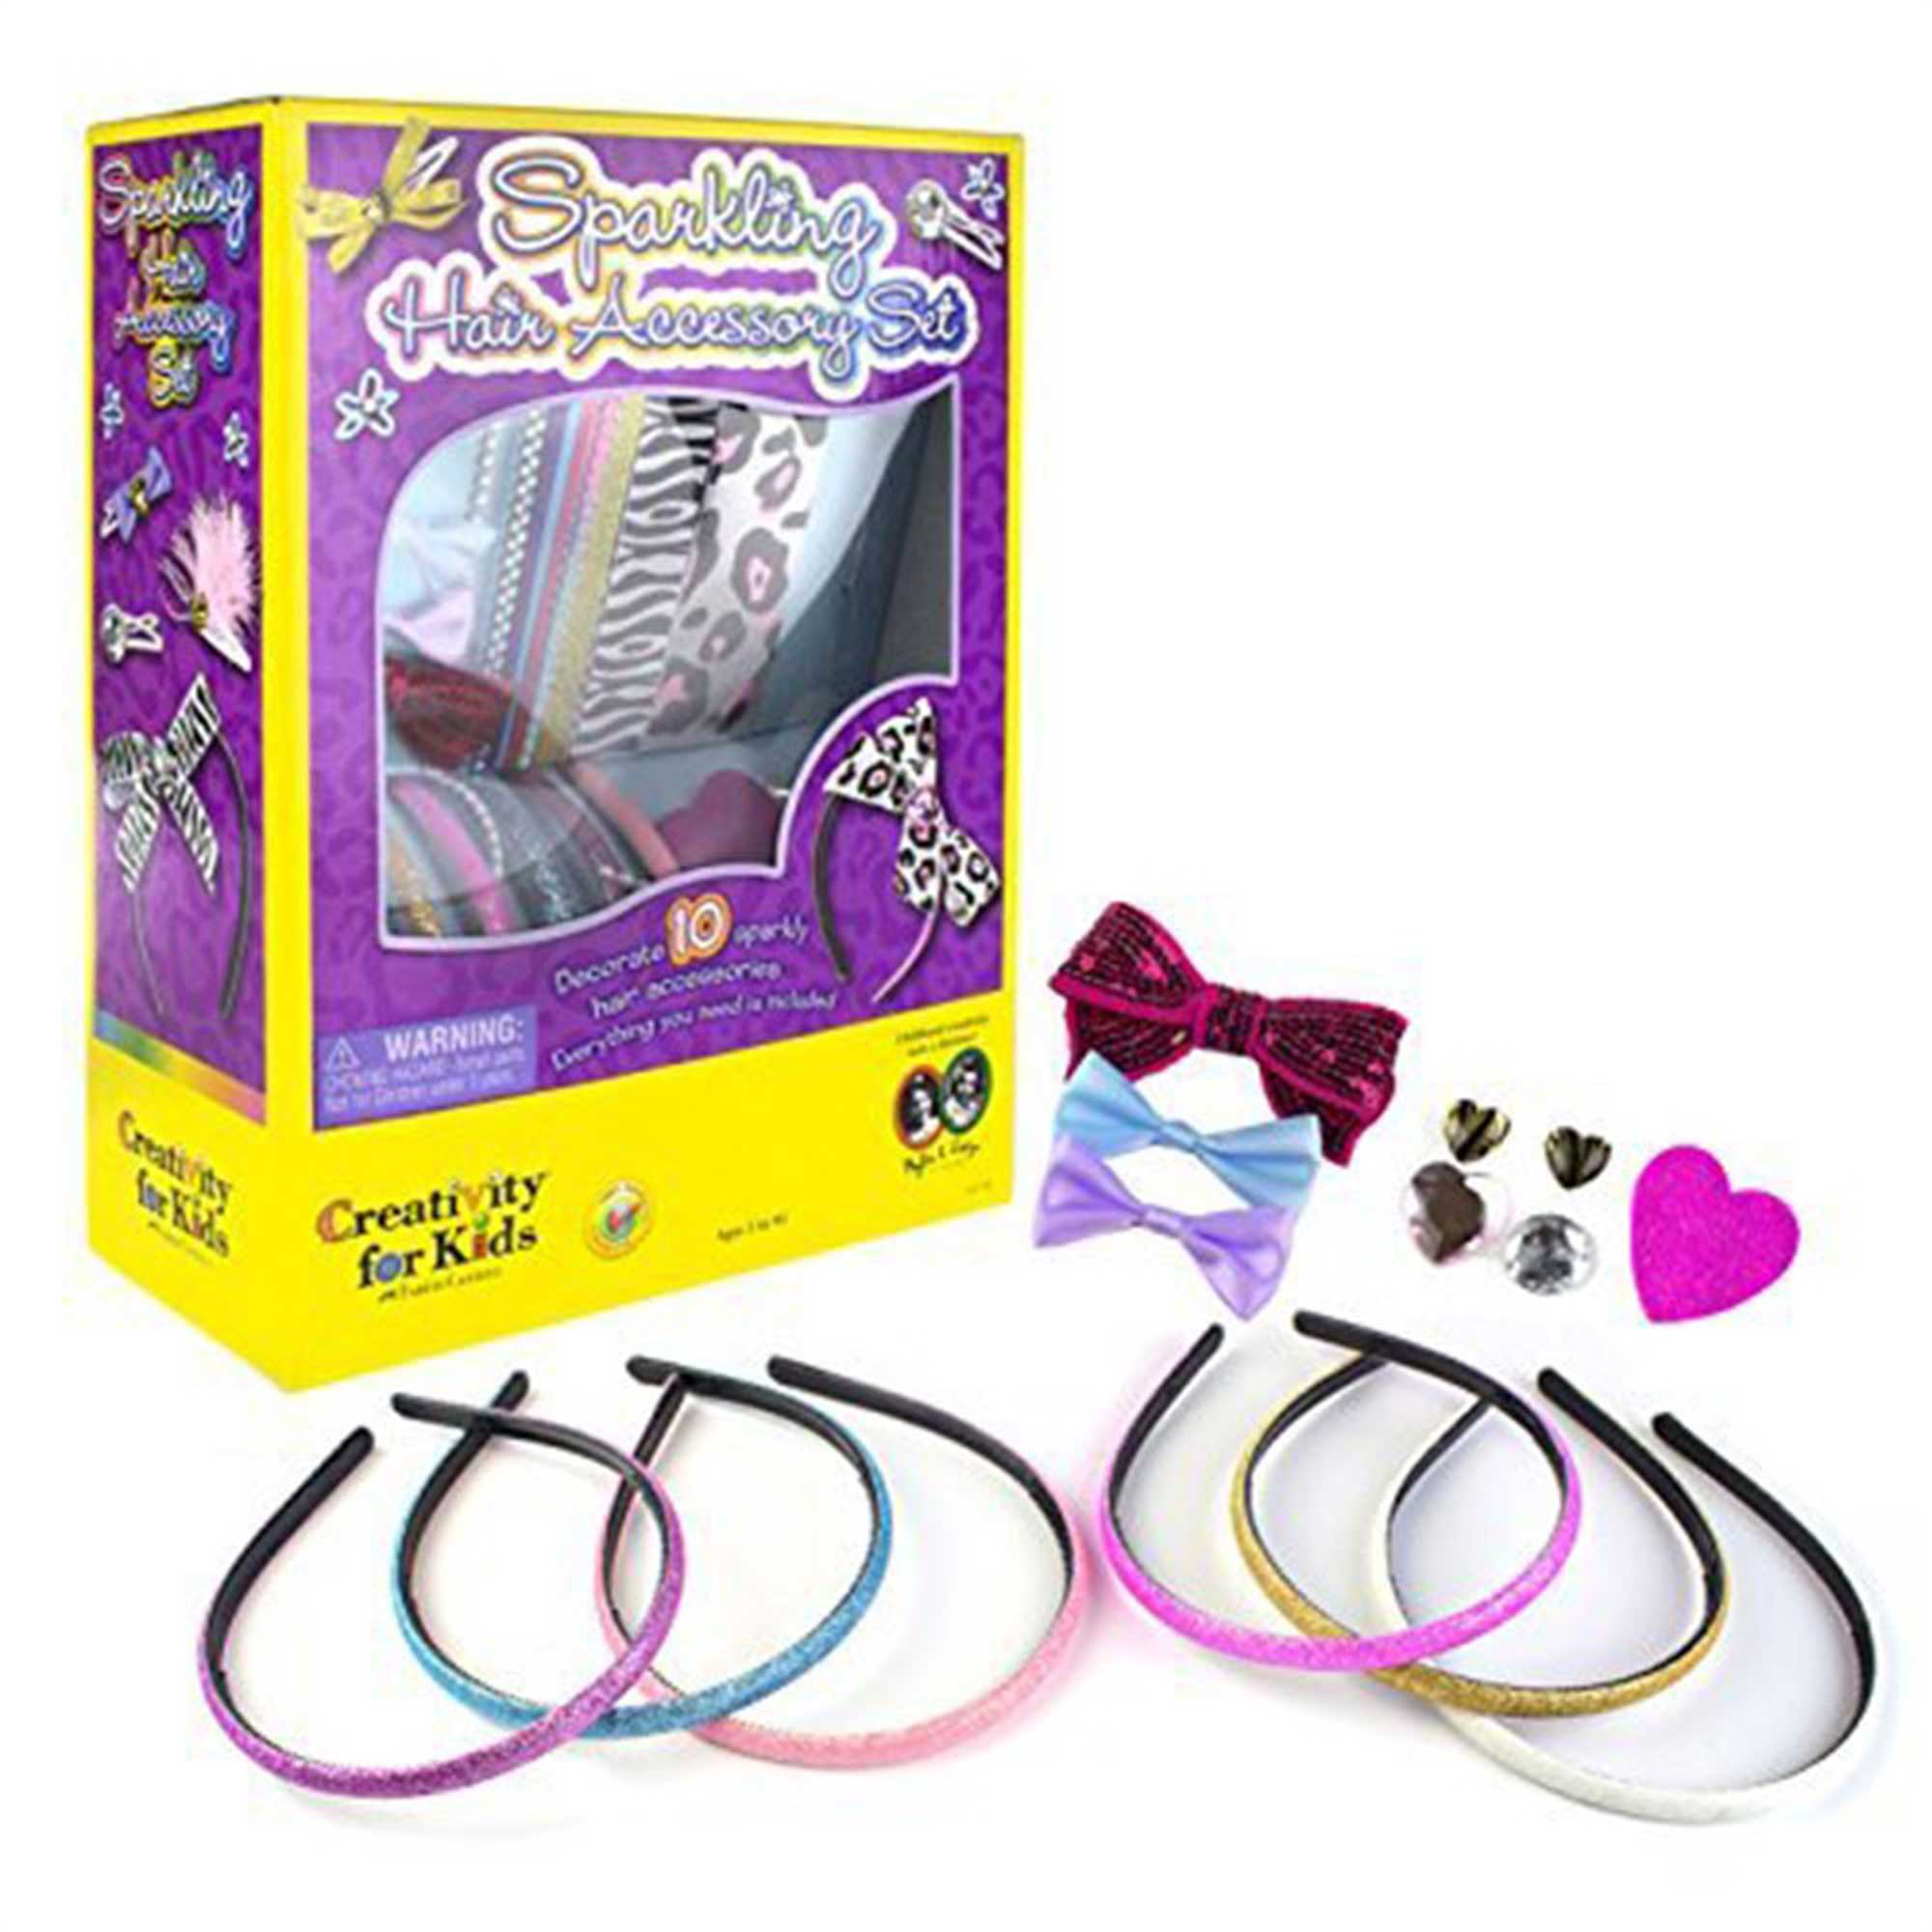 Creativity for Kids Sparkling Hair Accessory Set